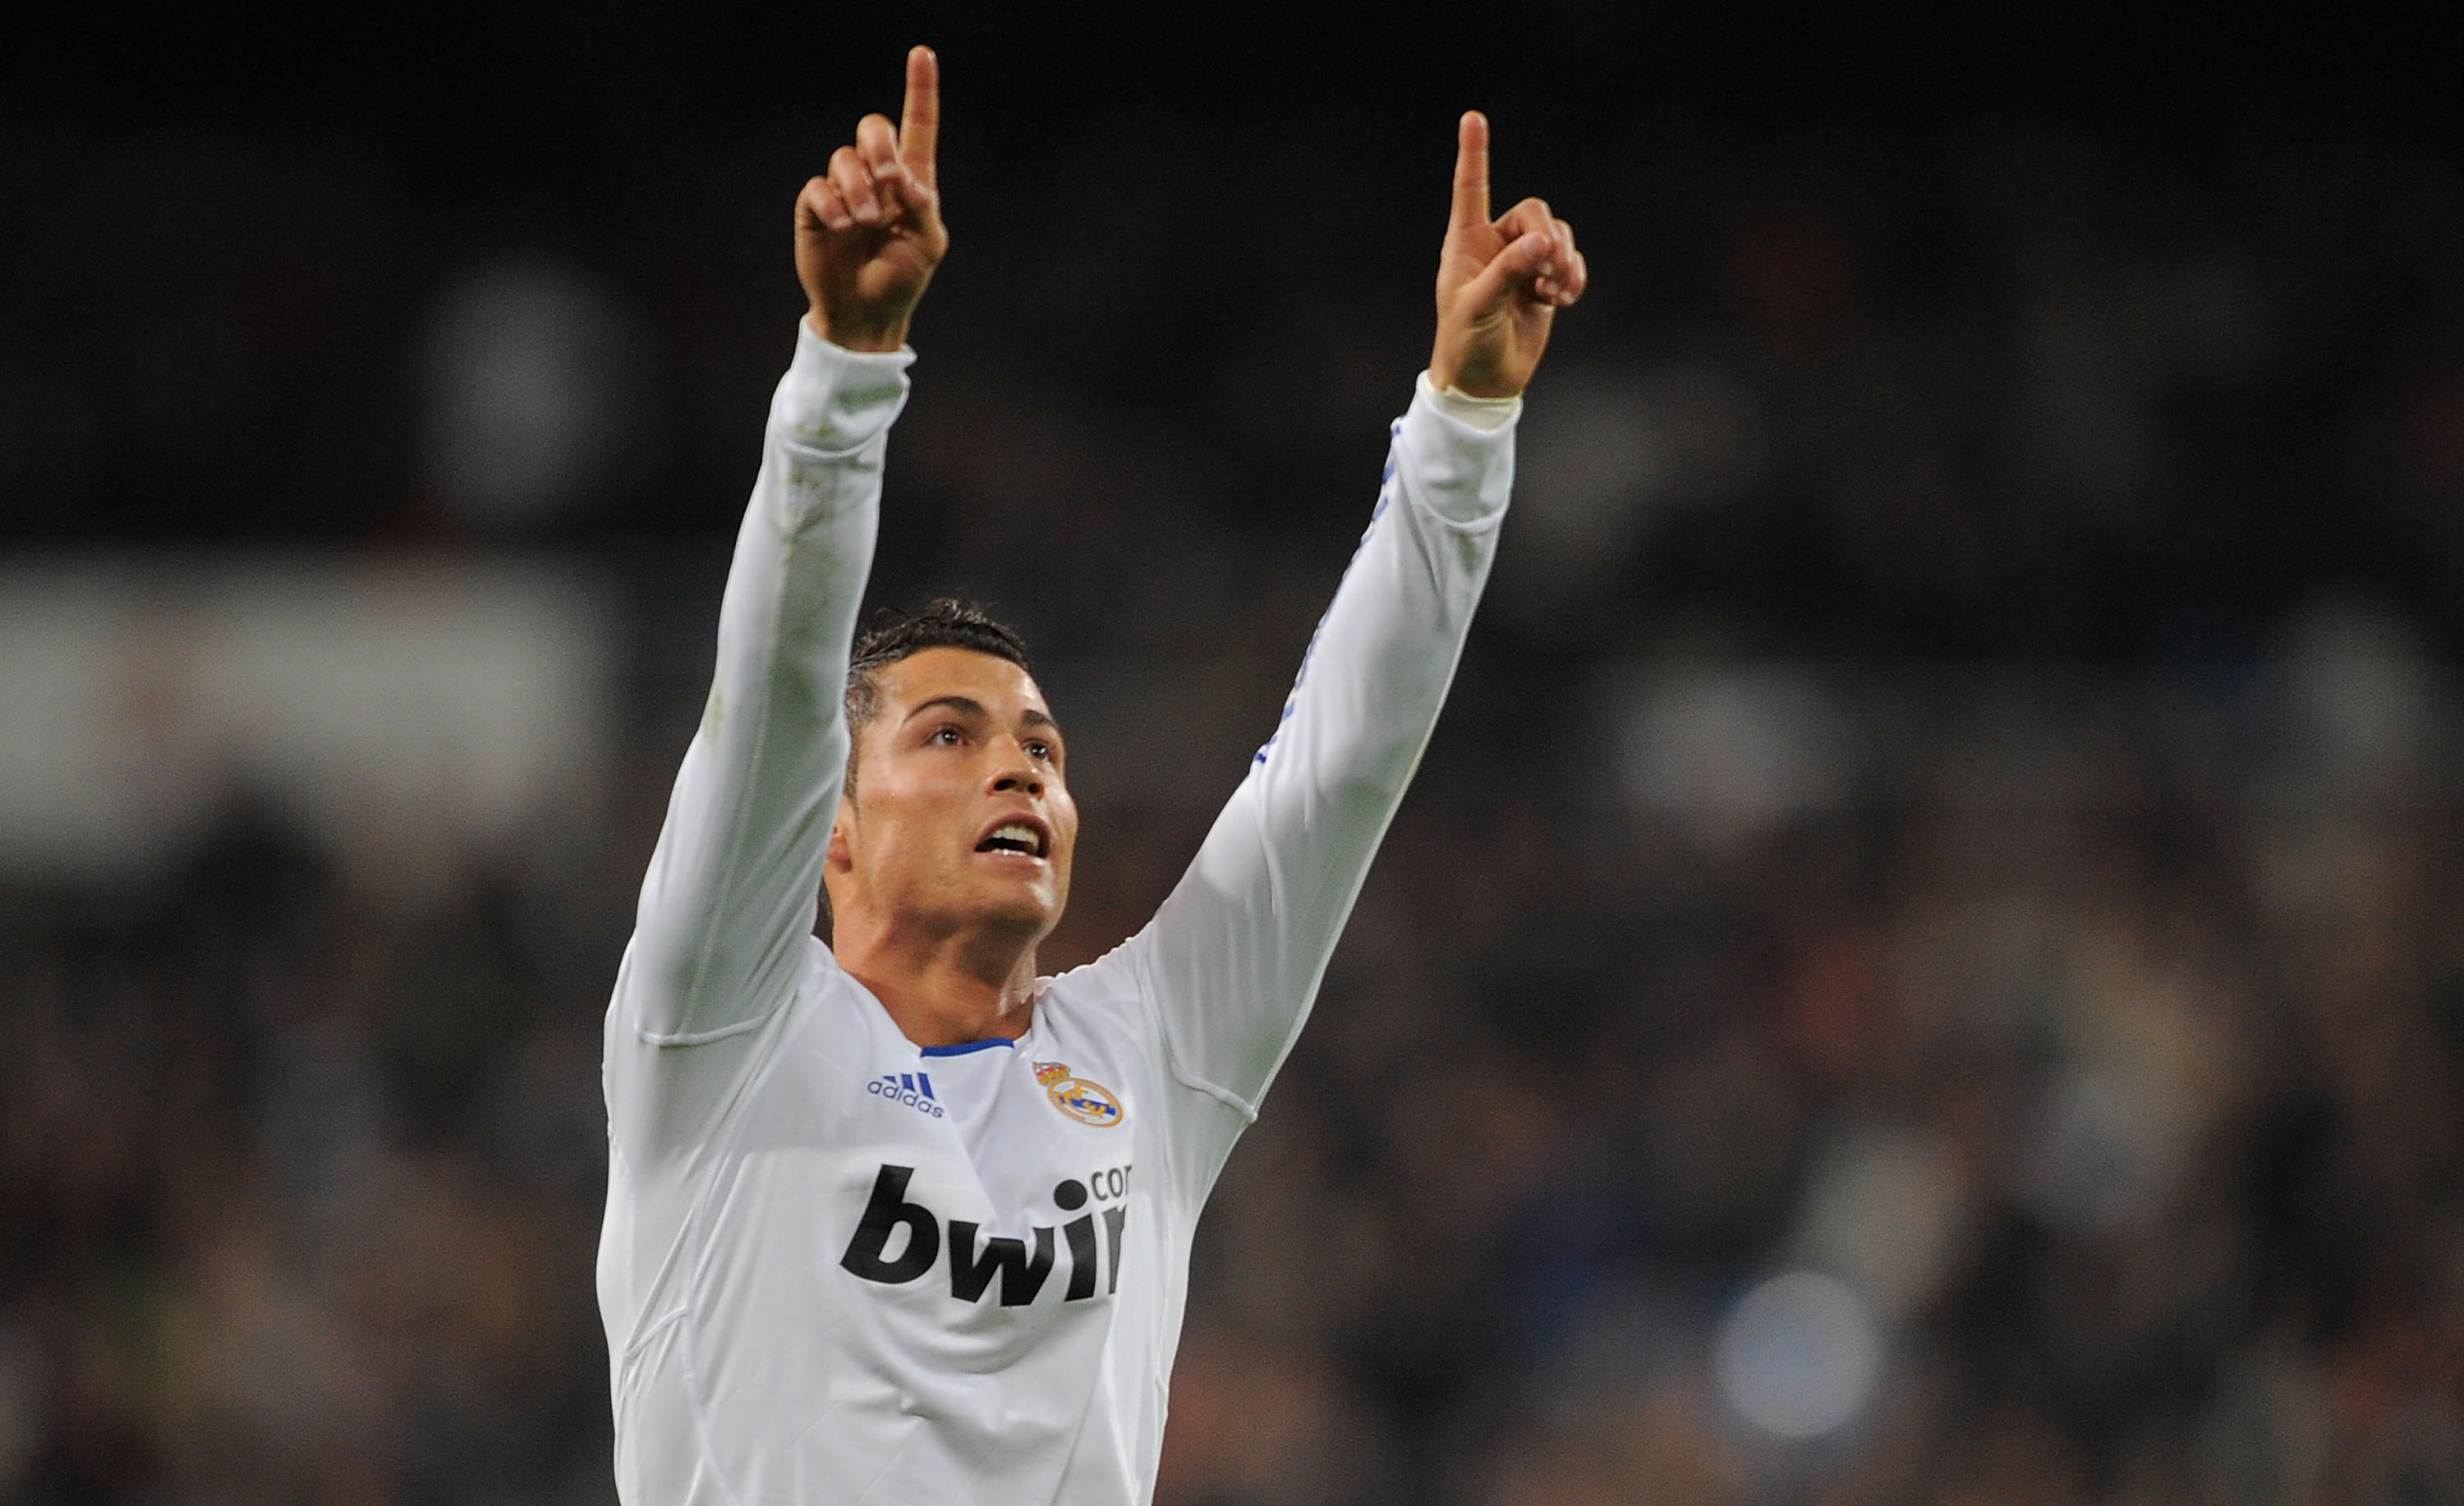 MADRID, SPAIN - JANUARY 09:  Cristiano Ronaldo   of Real Madrid celebrates after scoring Real's first goal during the La Liga match between Real Madrid and Villarreal at Estadio Santiago Bernabeu on January 9, 2011 in Madrid, Spain.  (Photo by Denis Doyle